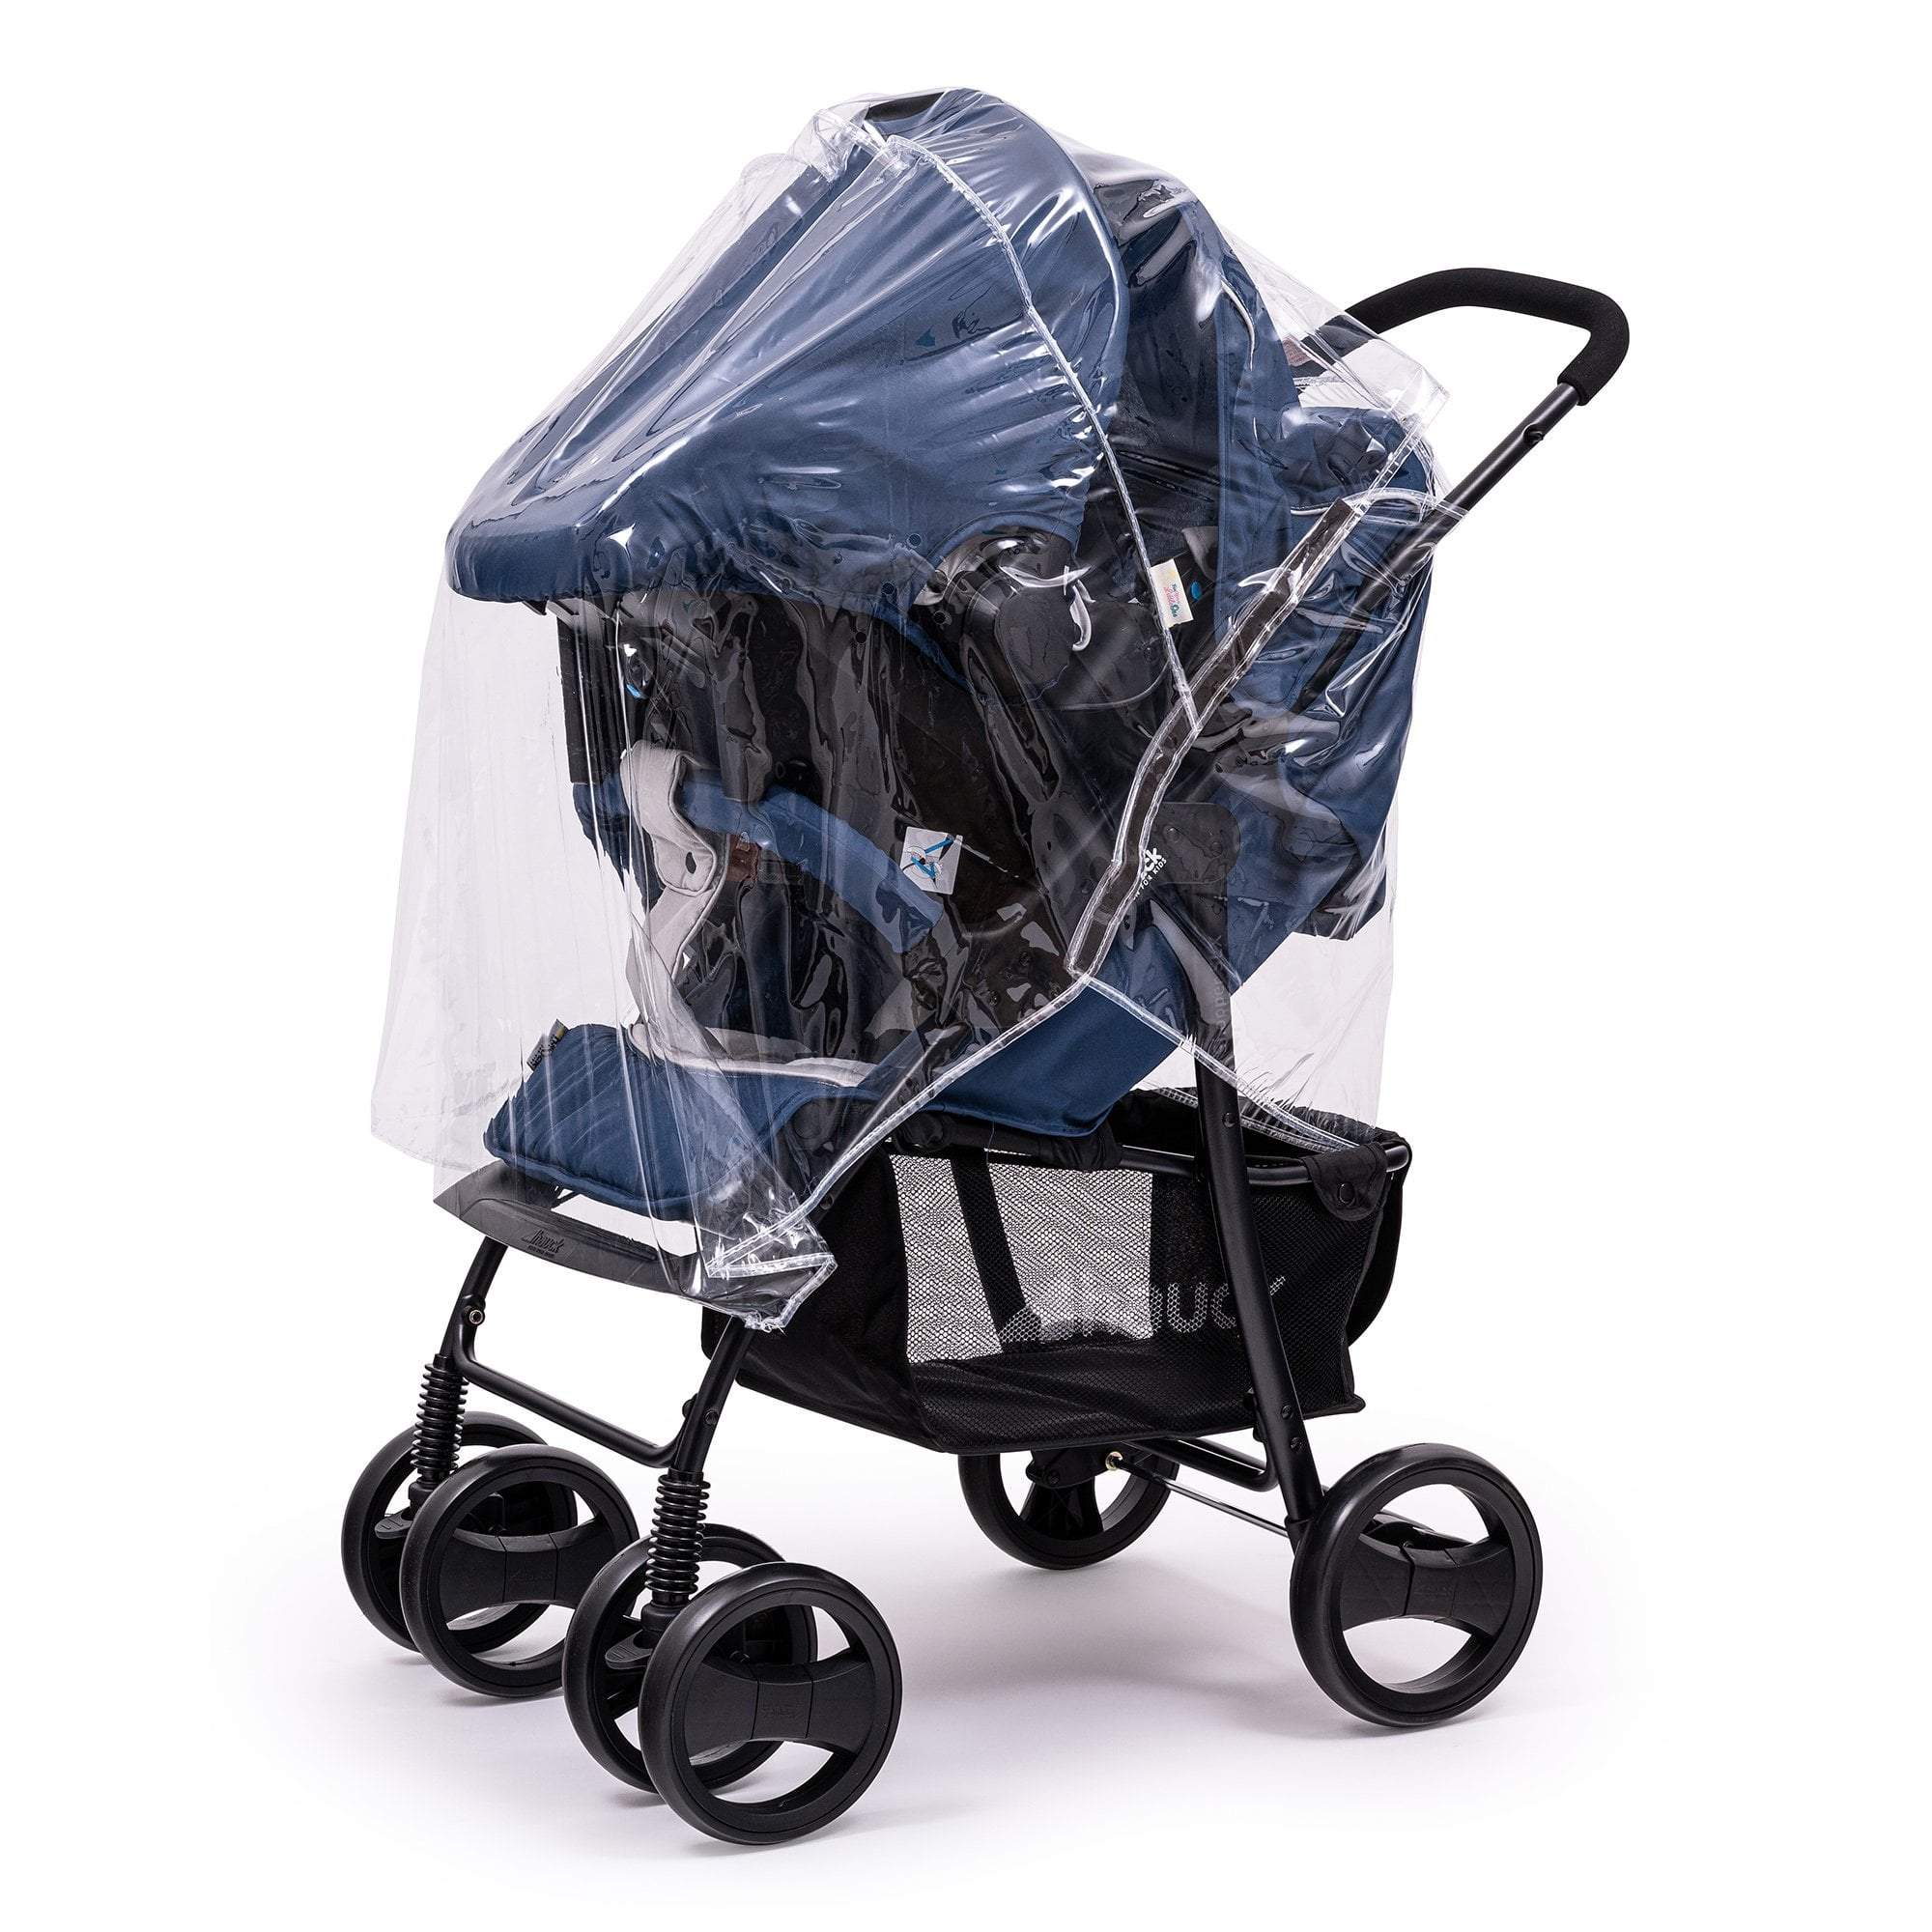 Travel System Raincover Compatible with Bebe Confort - Fits All Models - For Your Little One